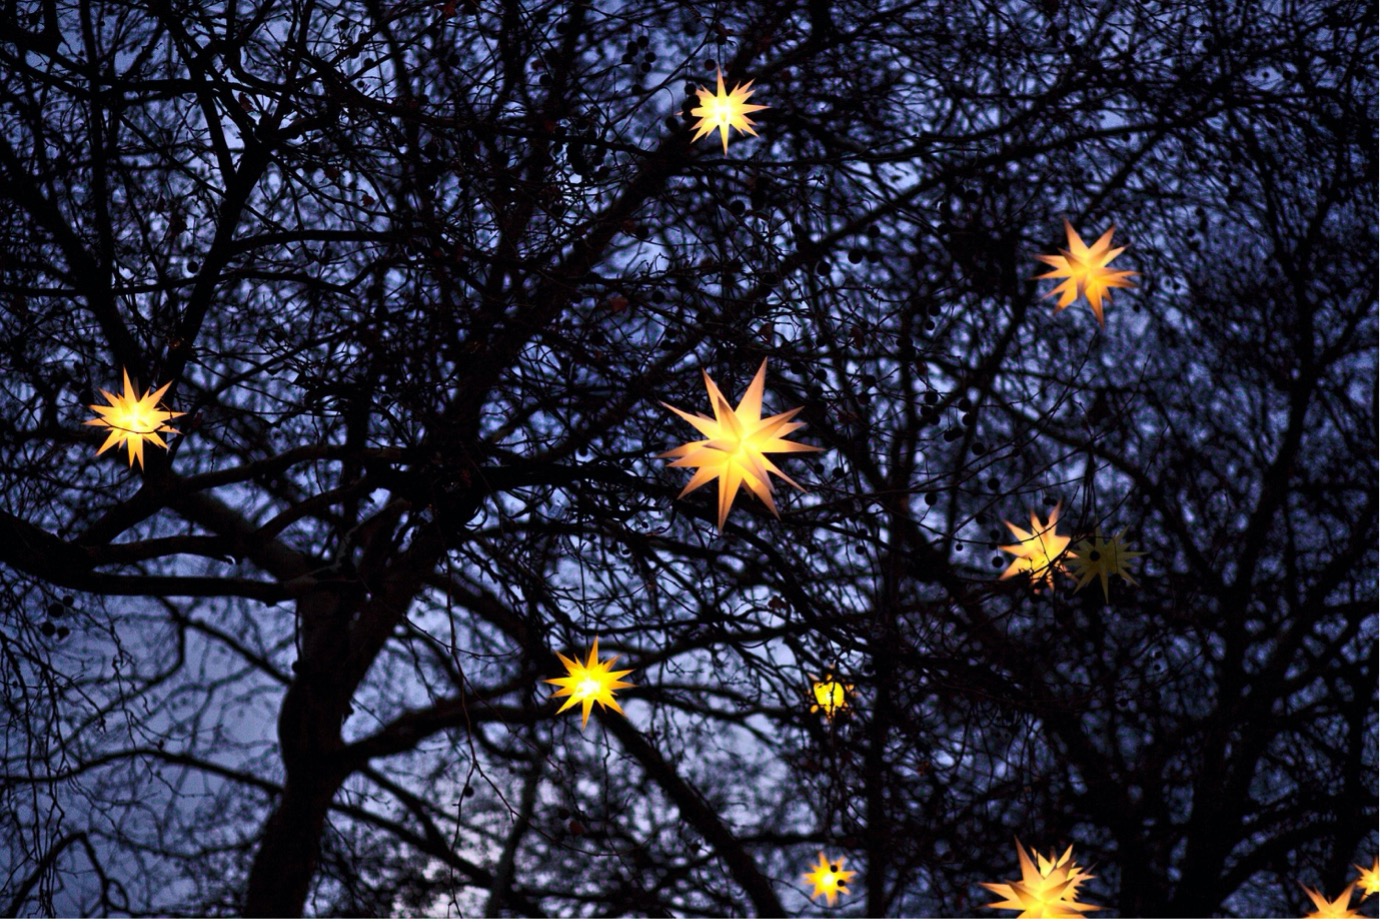 Christmas stars at market in Germany